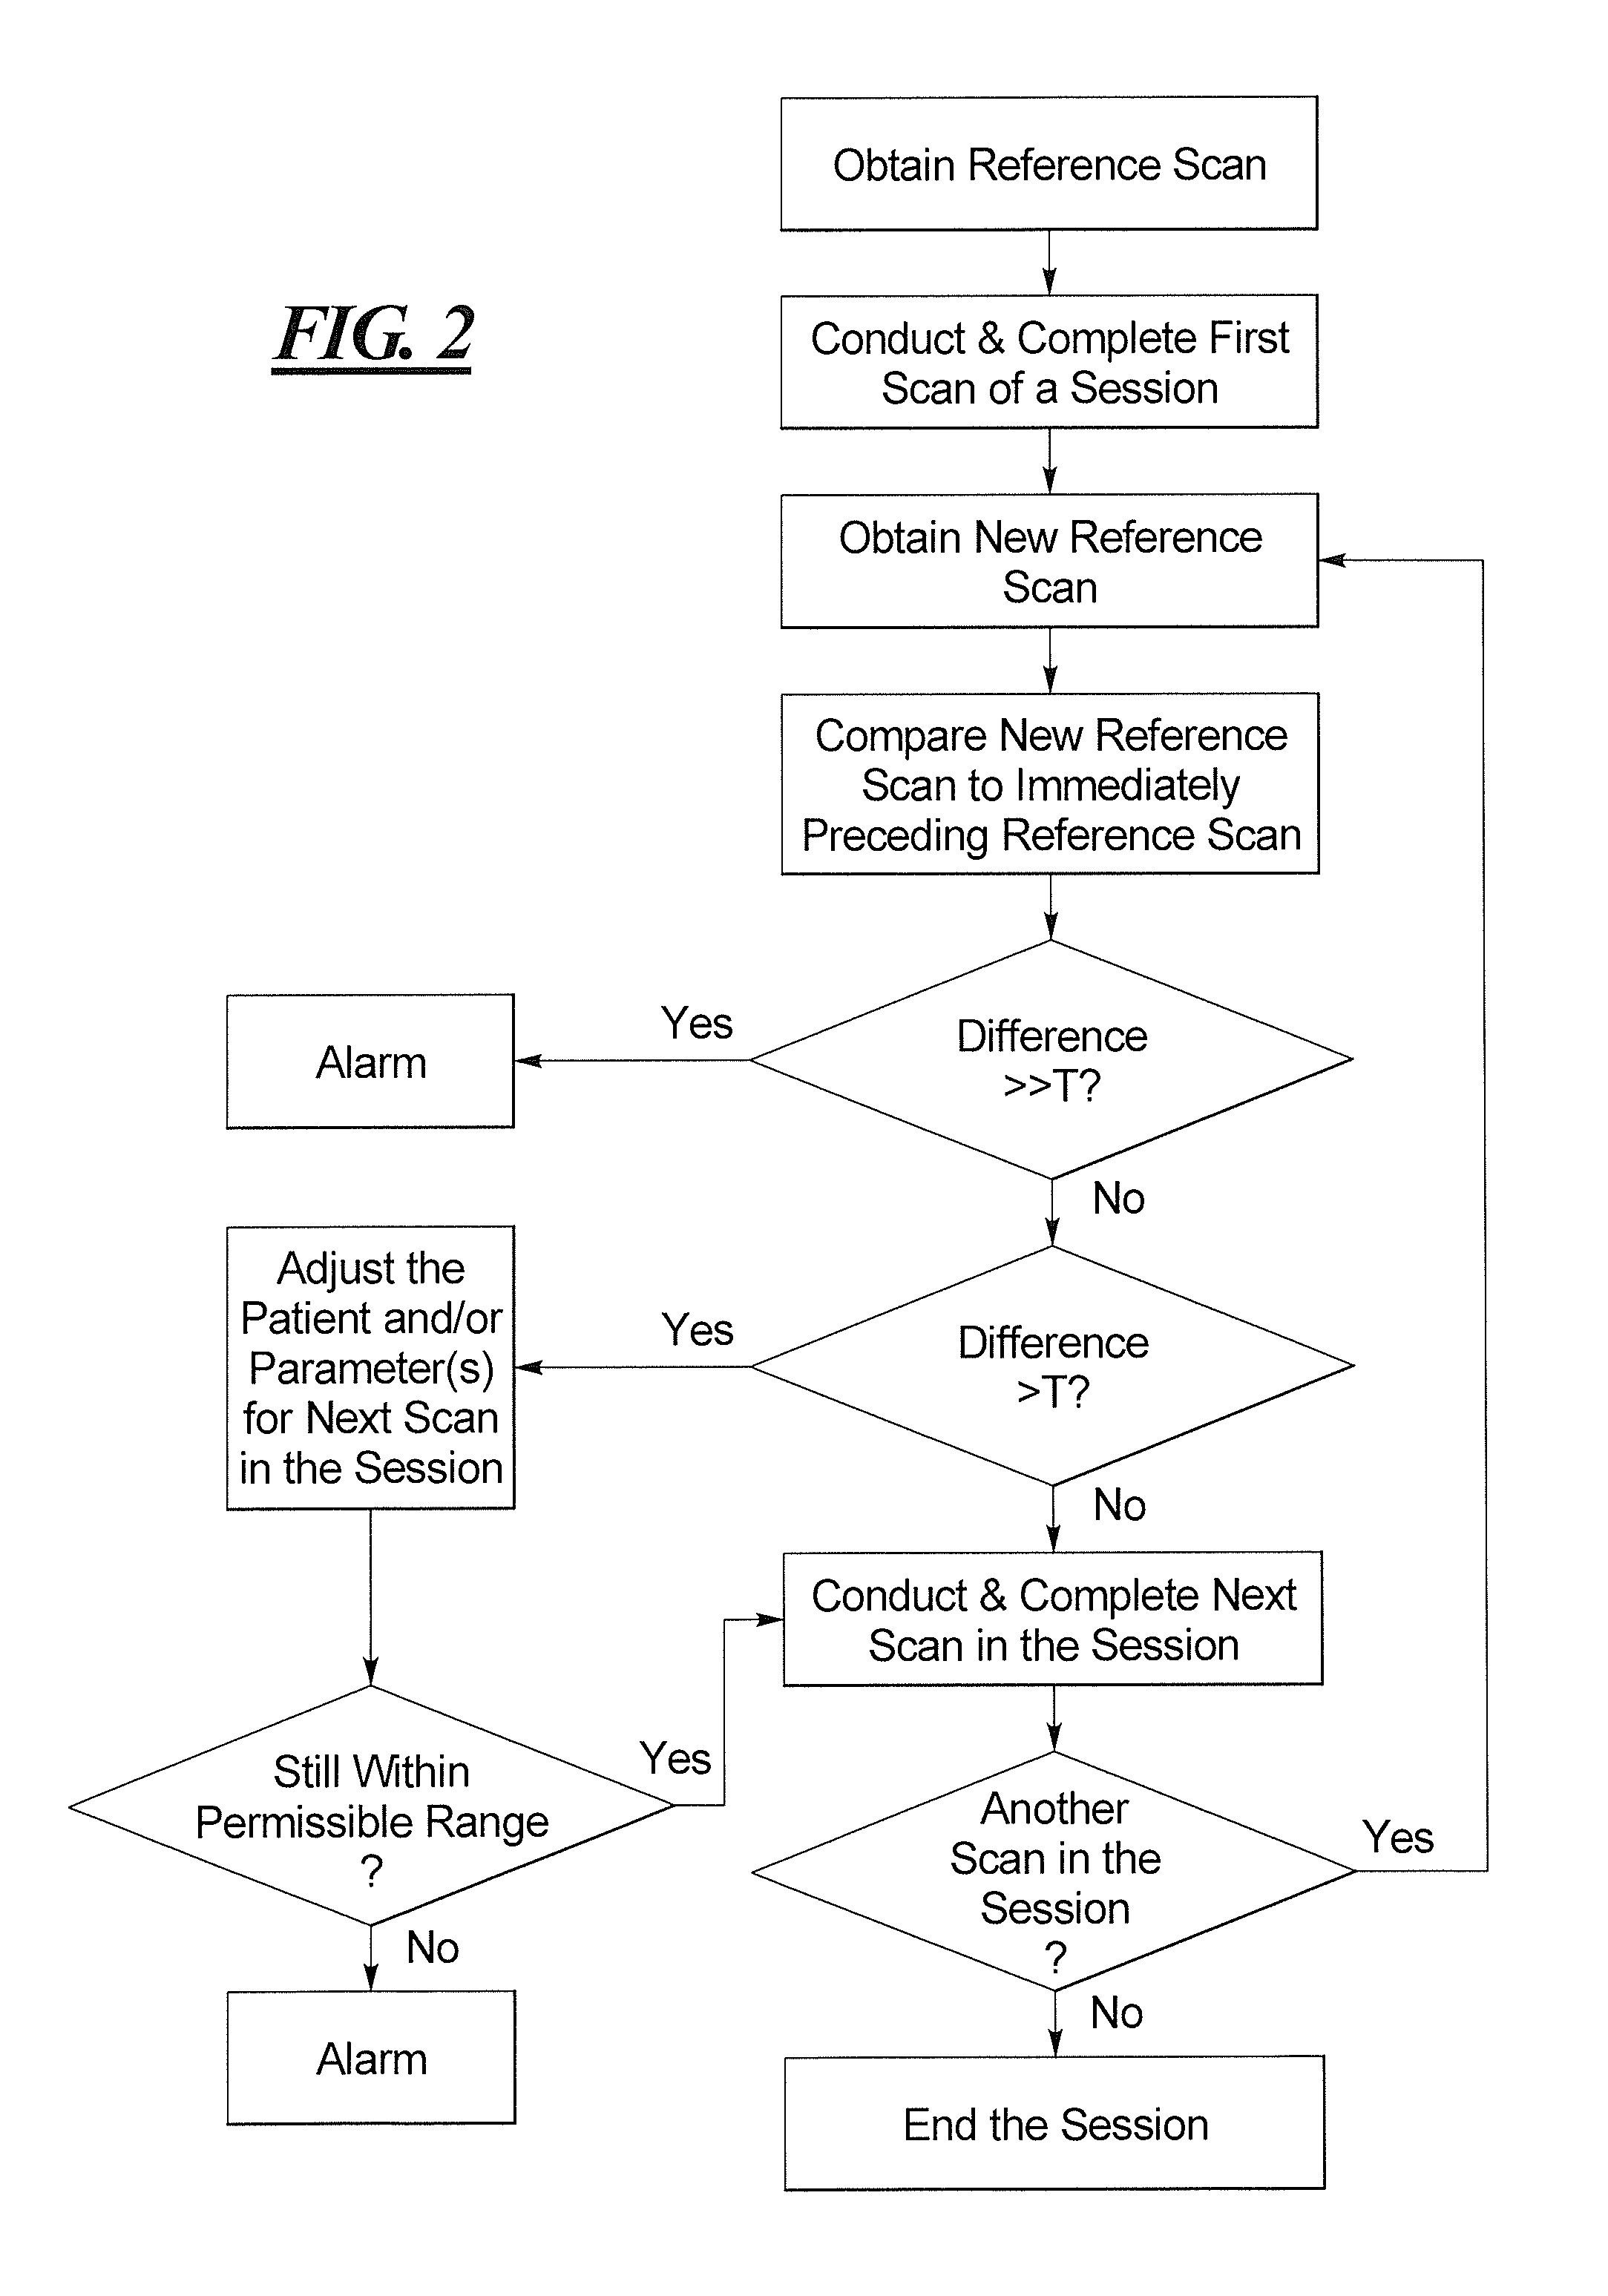 Method and apparatus to acquire magnetic resonance images in a session, with acquisition of a consistently valid reference scan